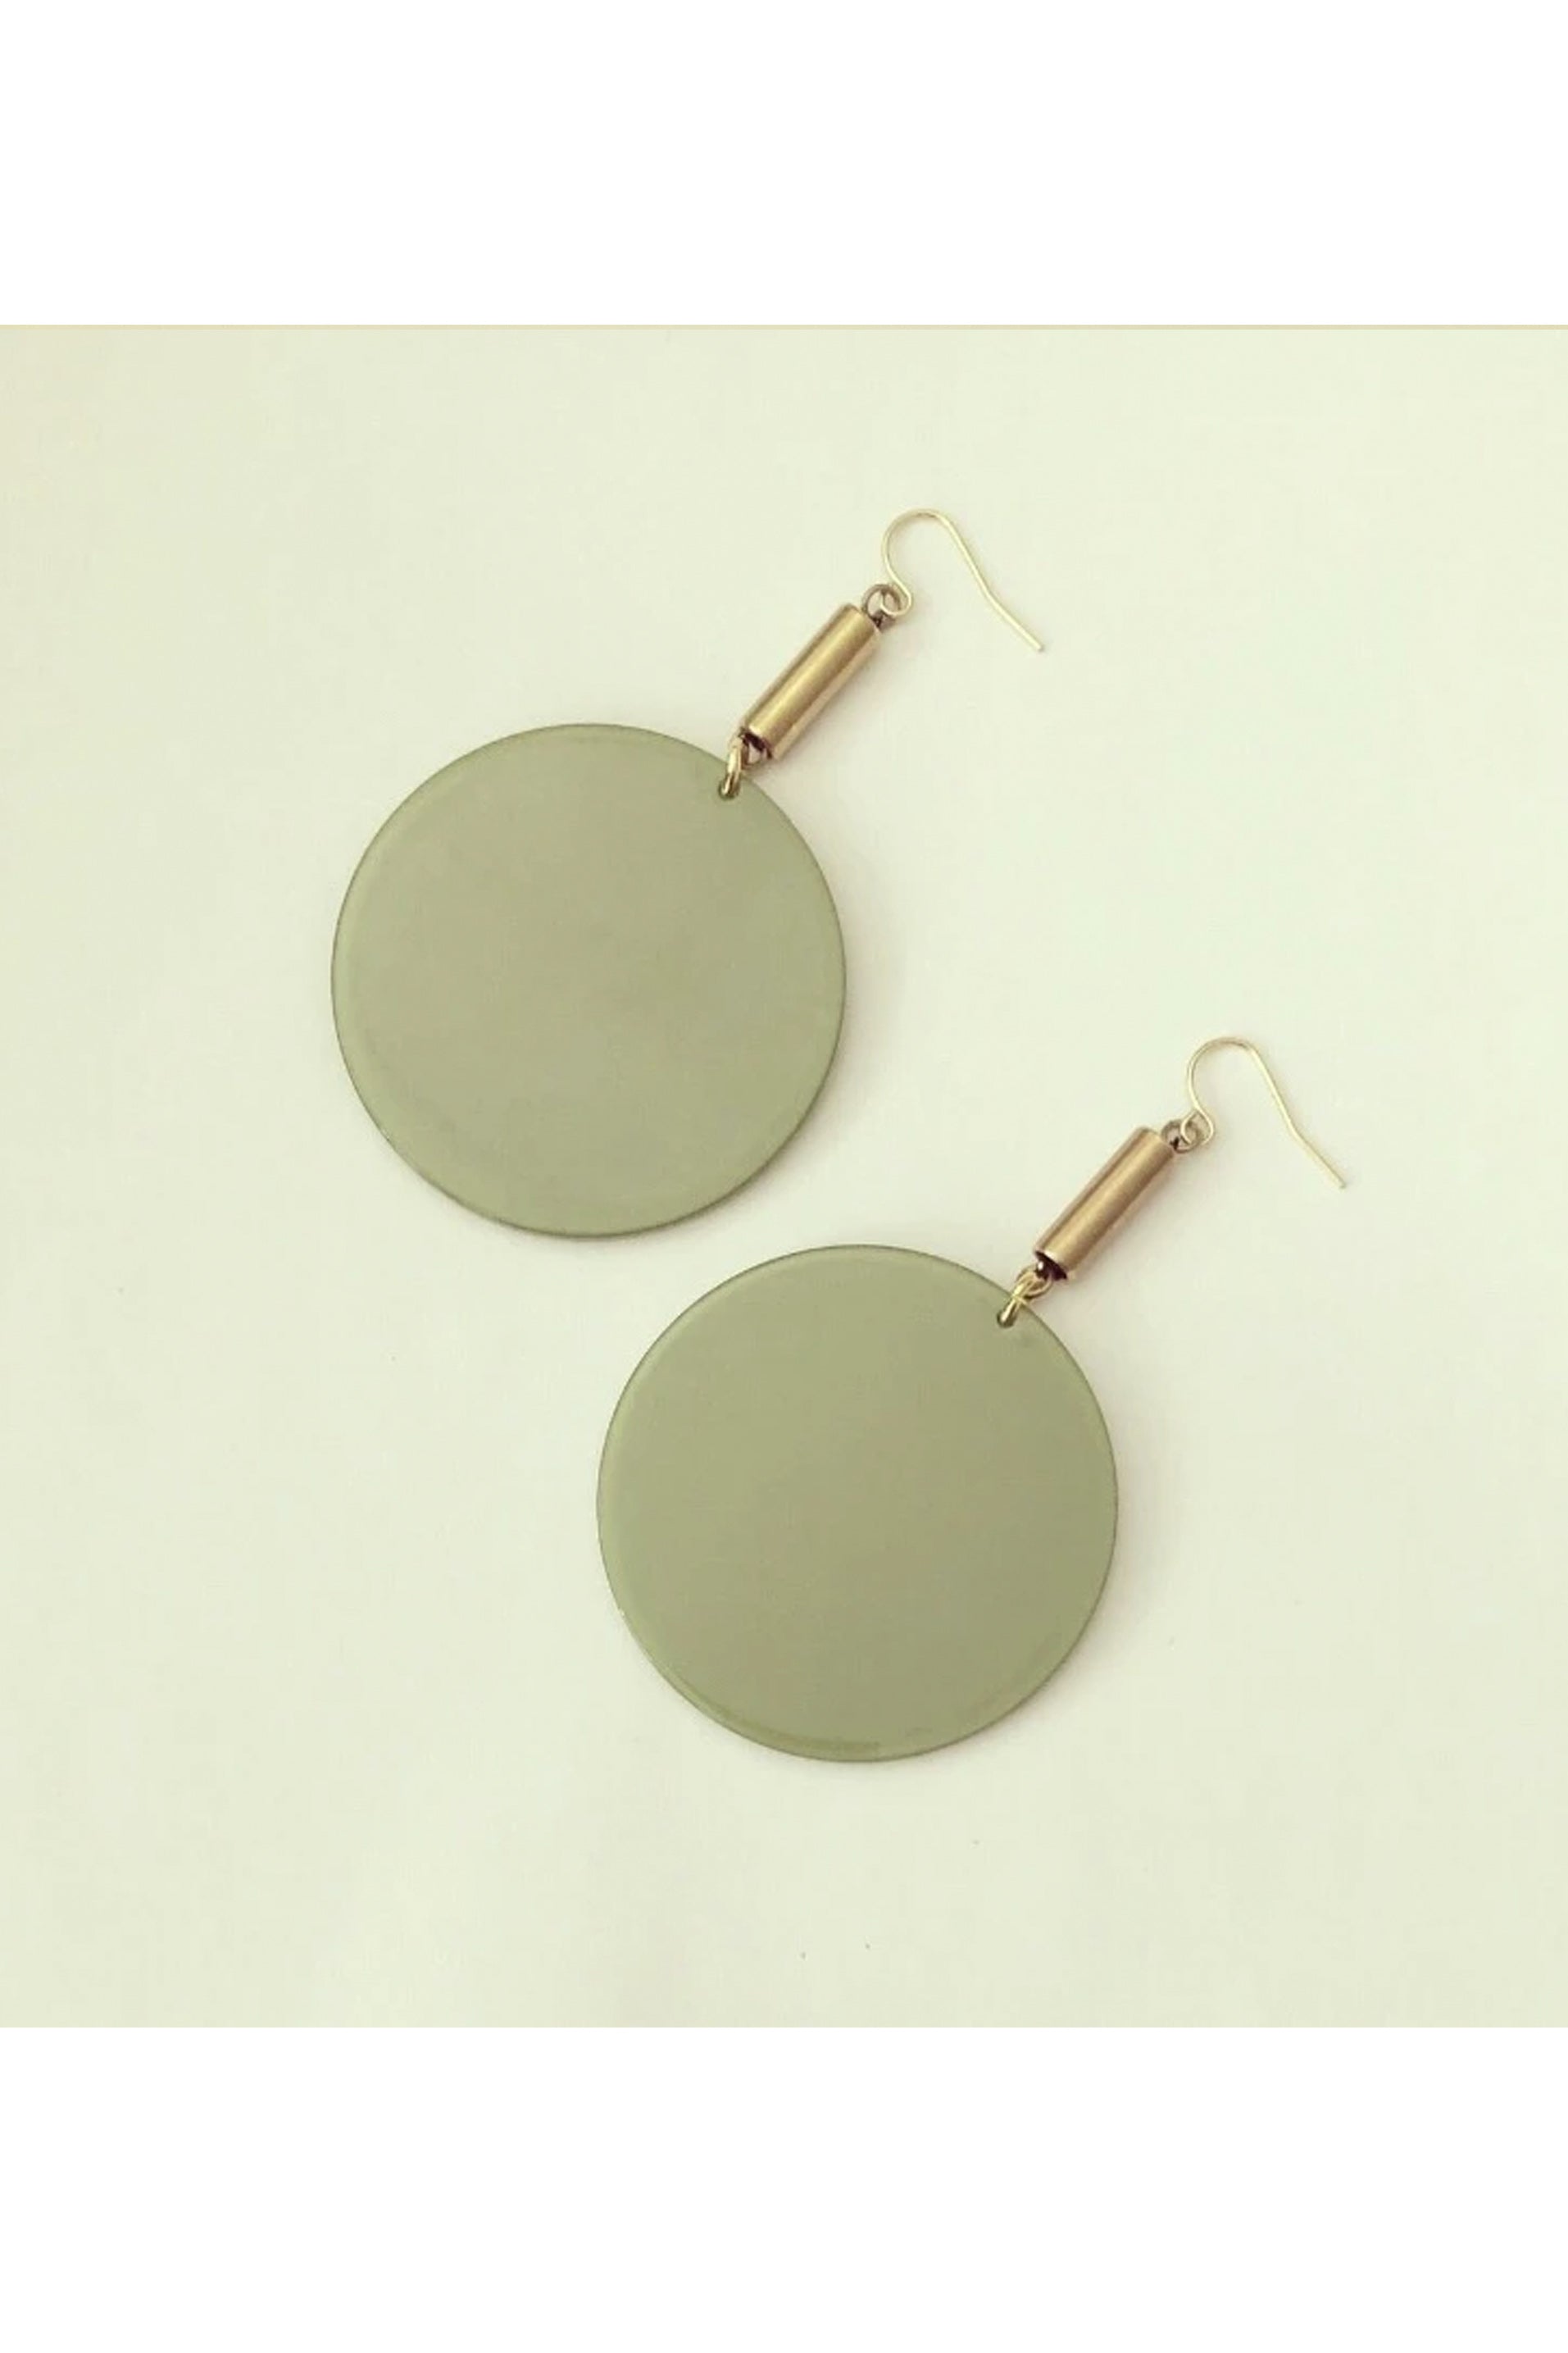 Flumme by Darlings of Denmark; flat lay; dangle earrings; raw brass tubes with green acrylic circle details